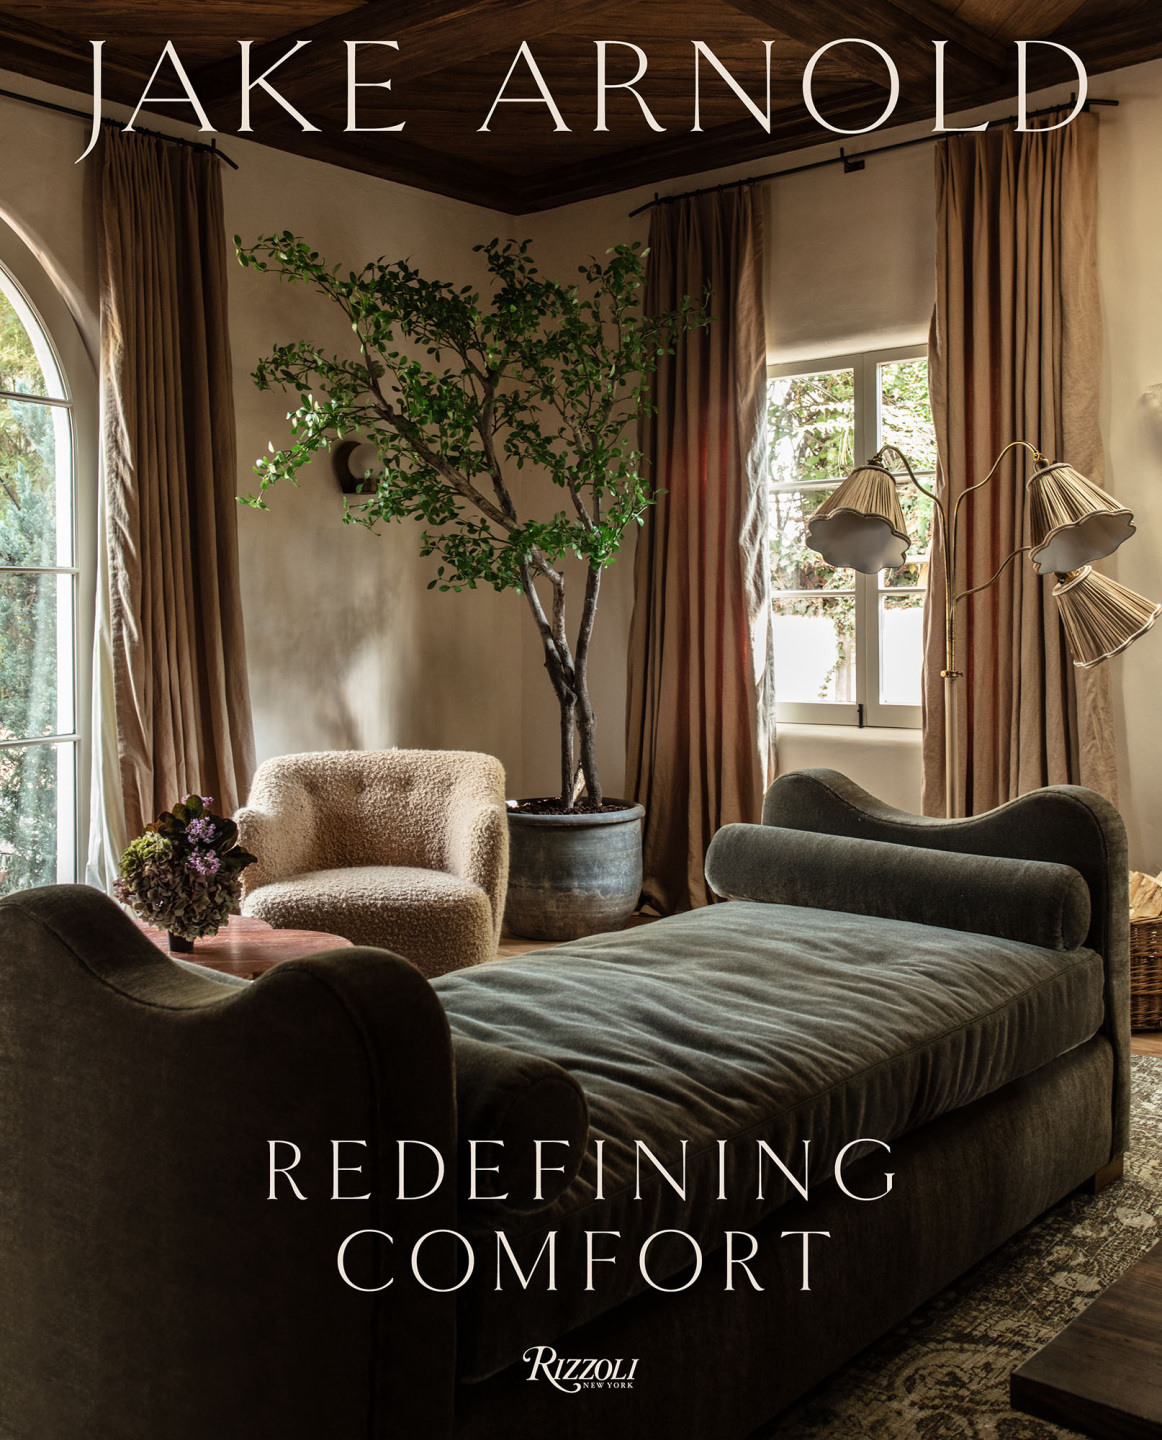 5 Interior Design Books to Read This Fall